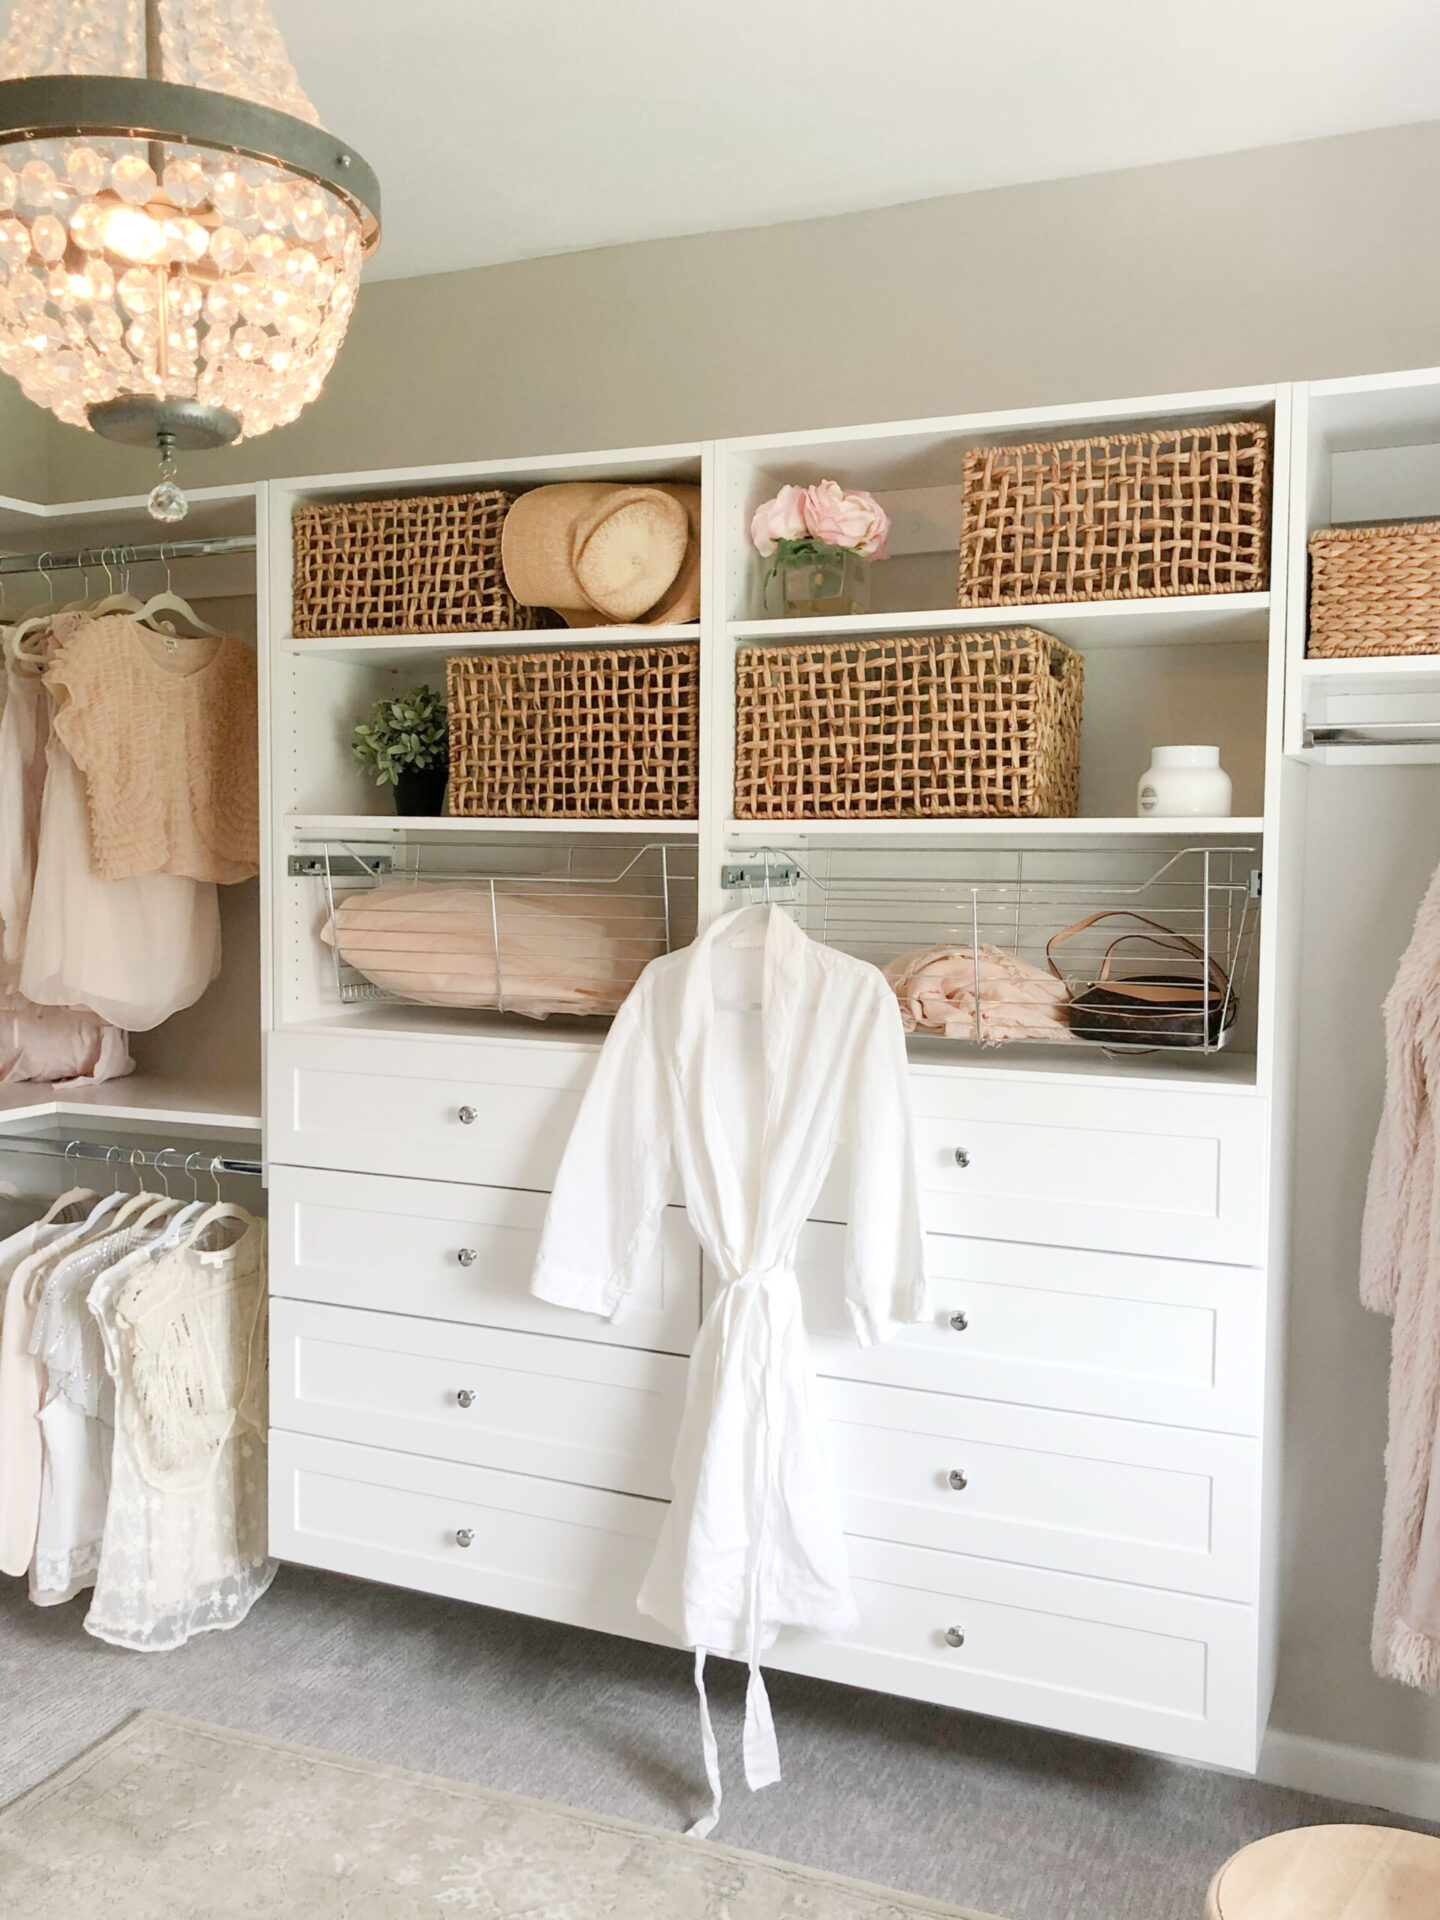 Natural woven baskets soften the Shaker style towers in my DIY closet, home office, dressing area - Hello Lovely Studio.